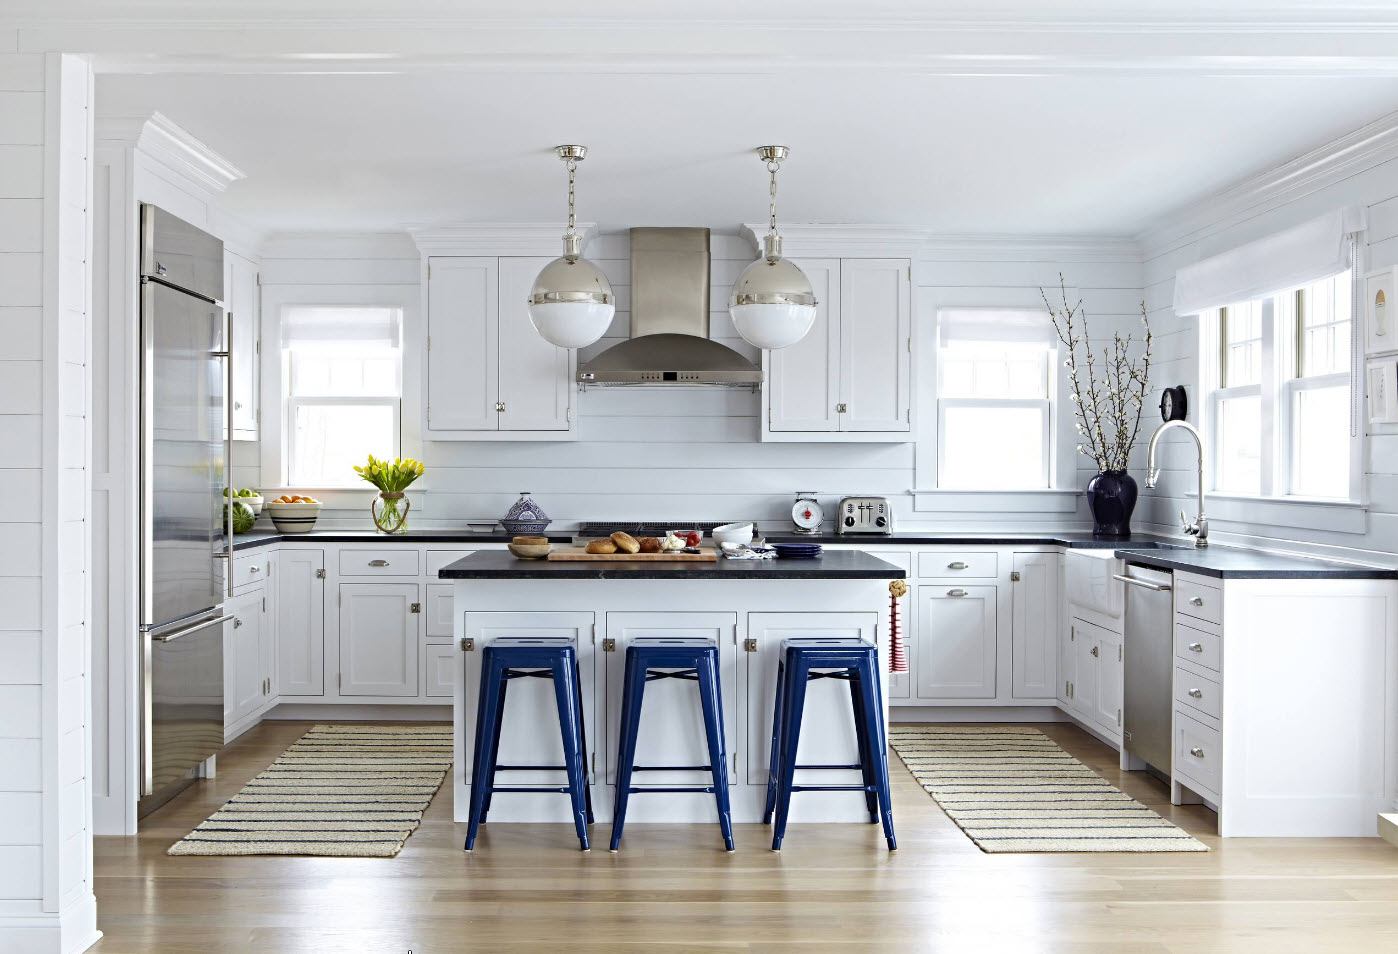 White colored kitchen with blue chairs